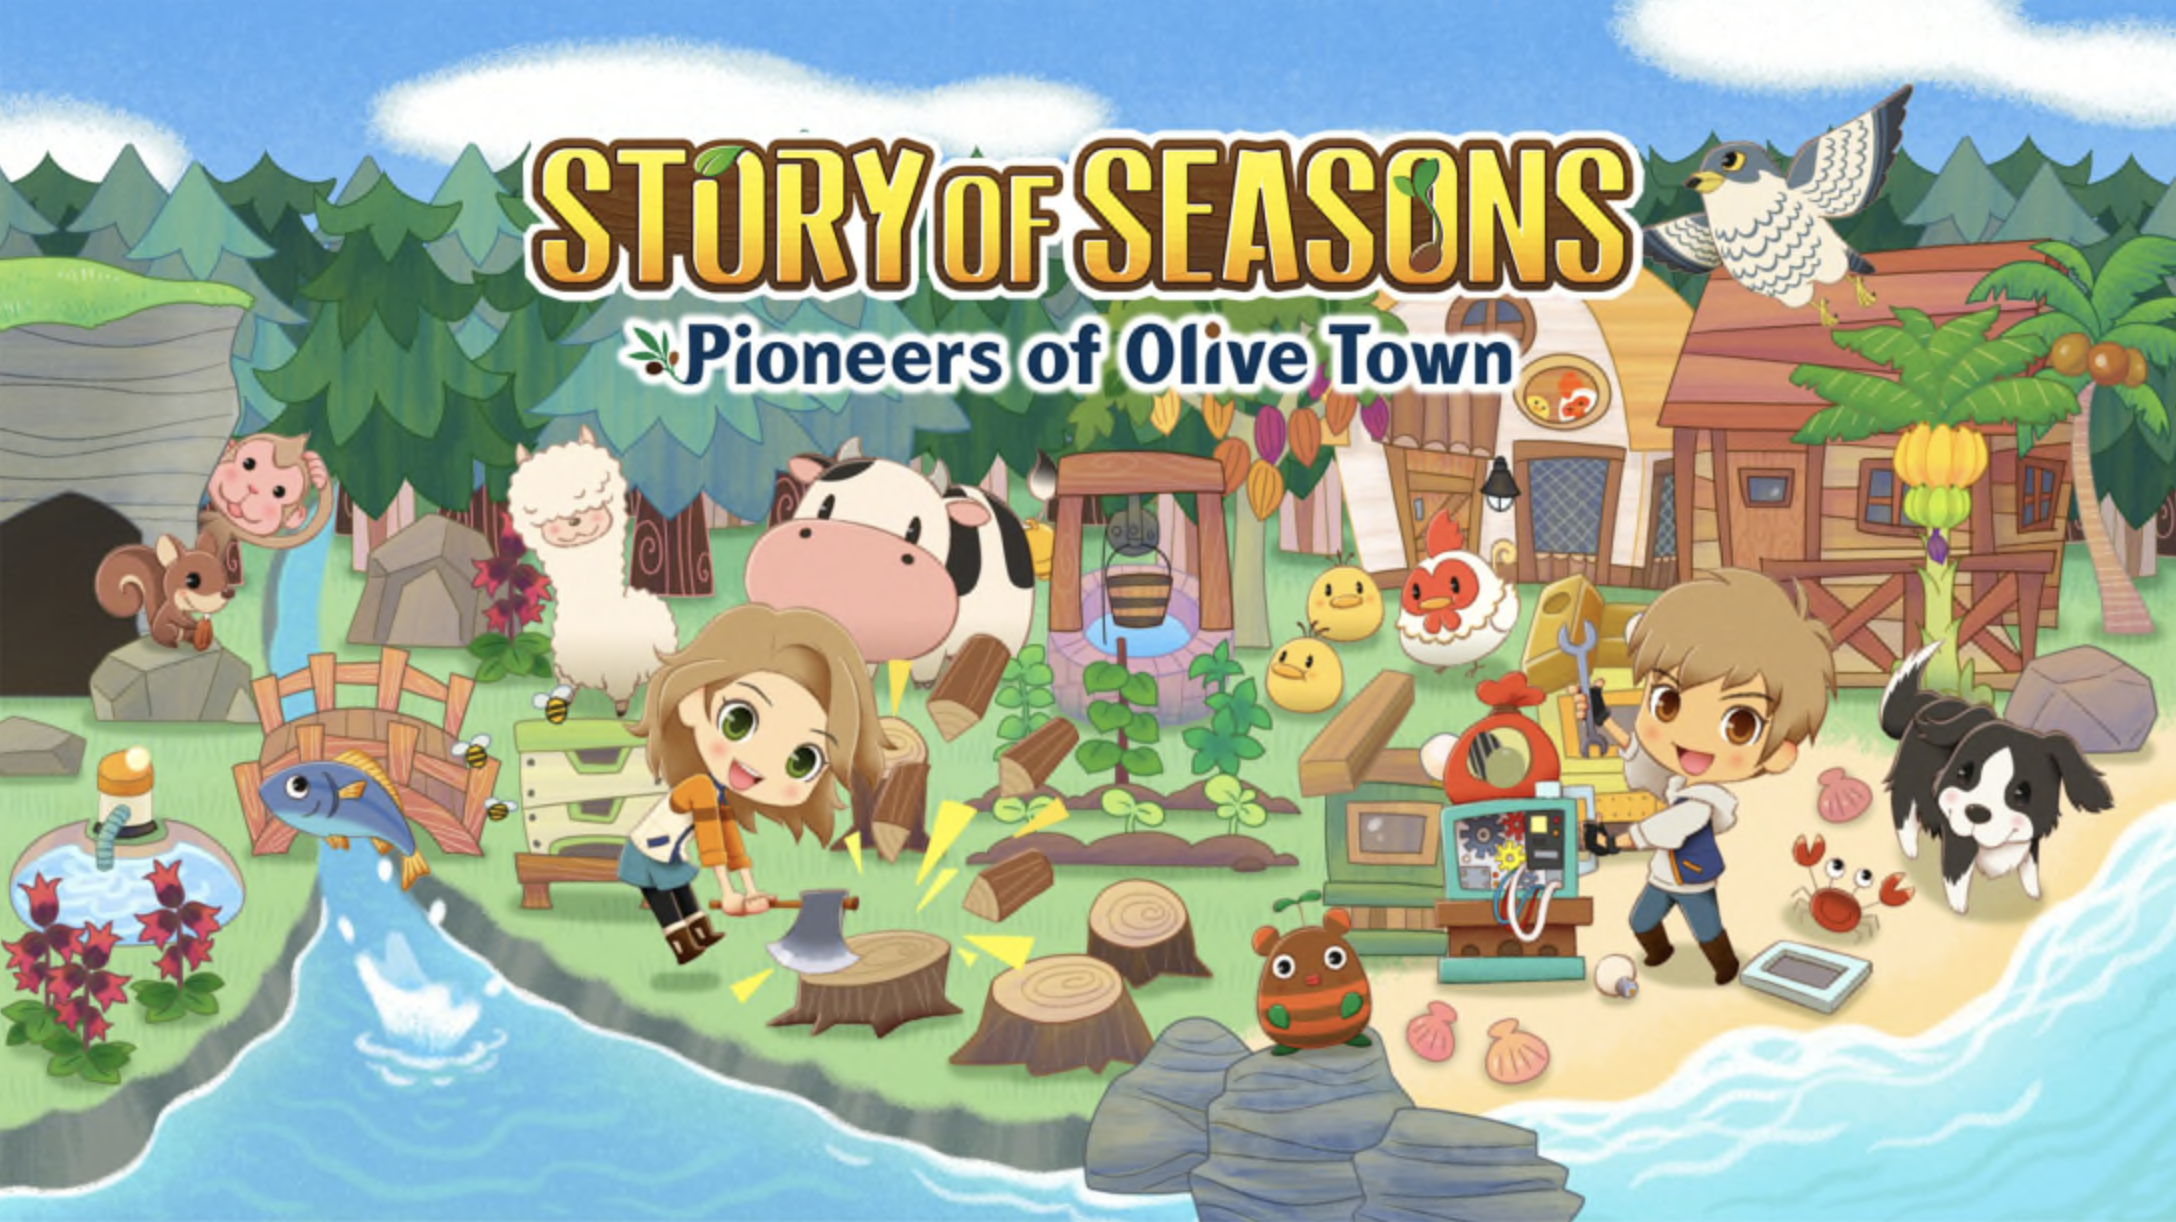 How to Earn Money Fast in Story of Seasons: Pioneers of Olive Town